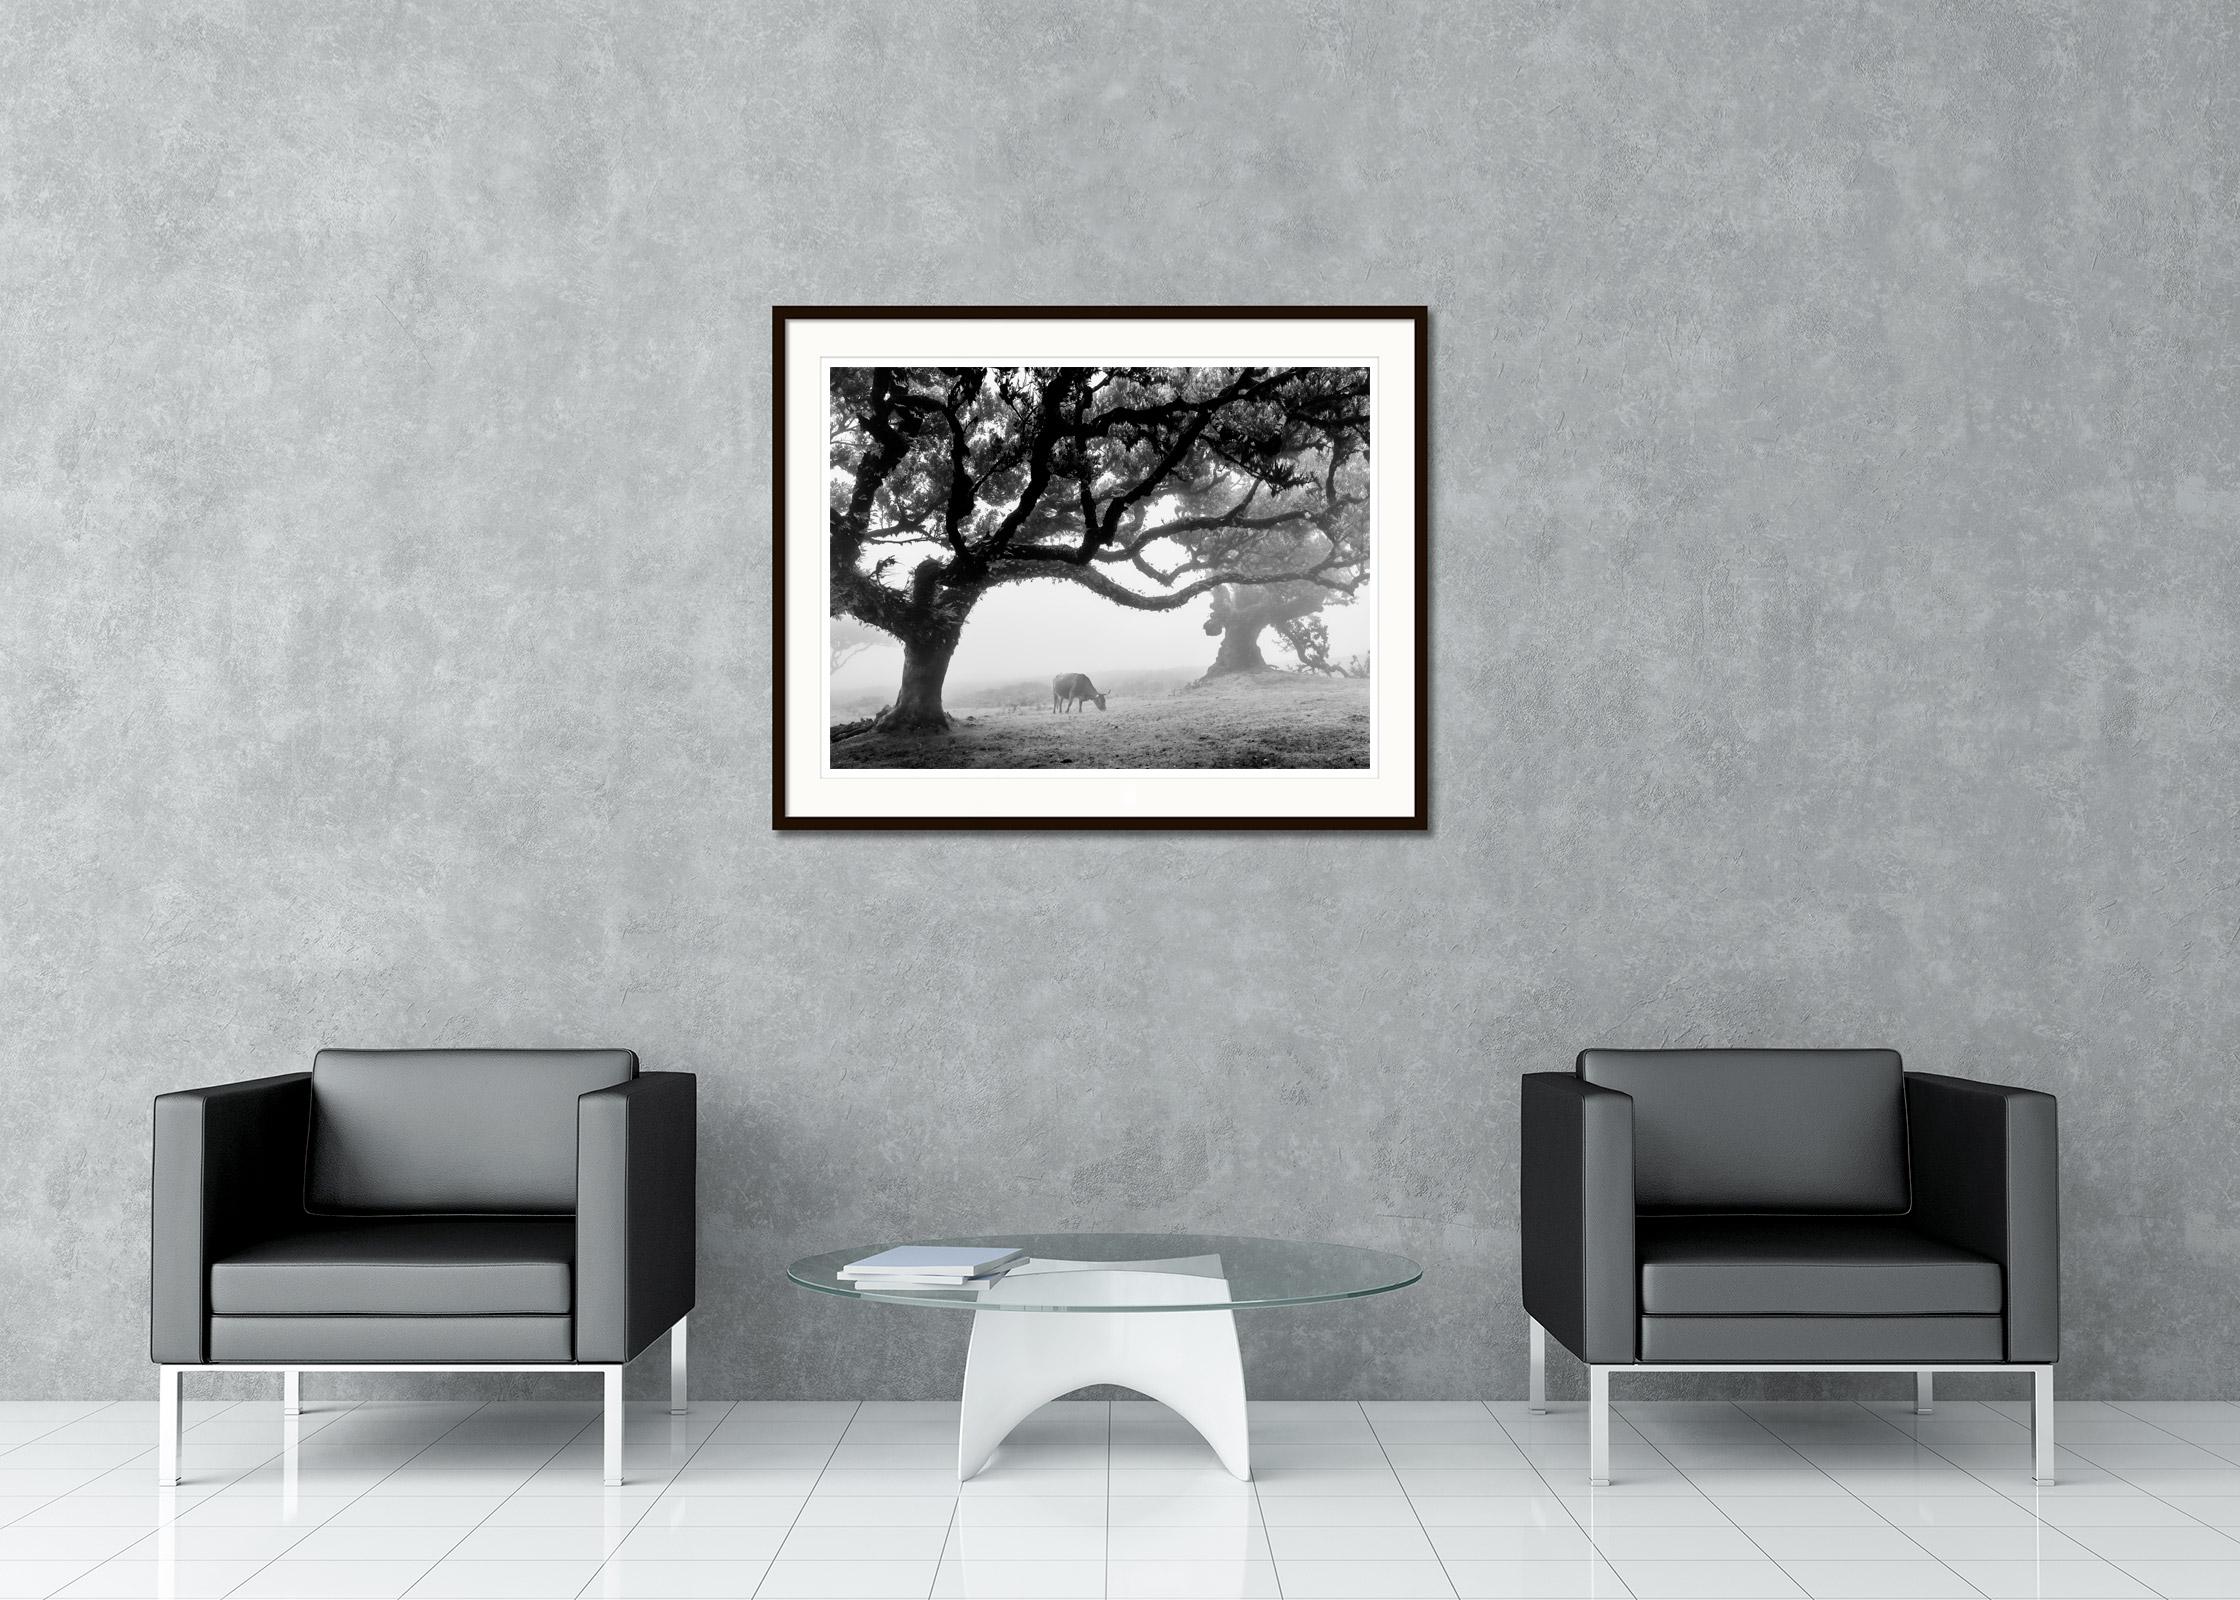 Black and White Fine Art landscape photography - Fairy forest of madeira in the fog with cows and crooked trees, Fanal, Portugal. Archival pigment ink print, edition of 5. Signed, titled, dated and numbered by artist. Certificate of authenticity